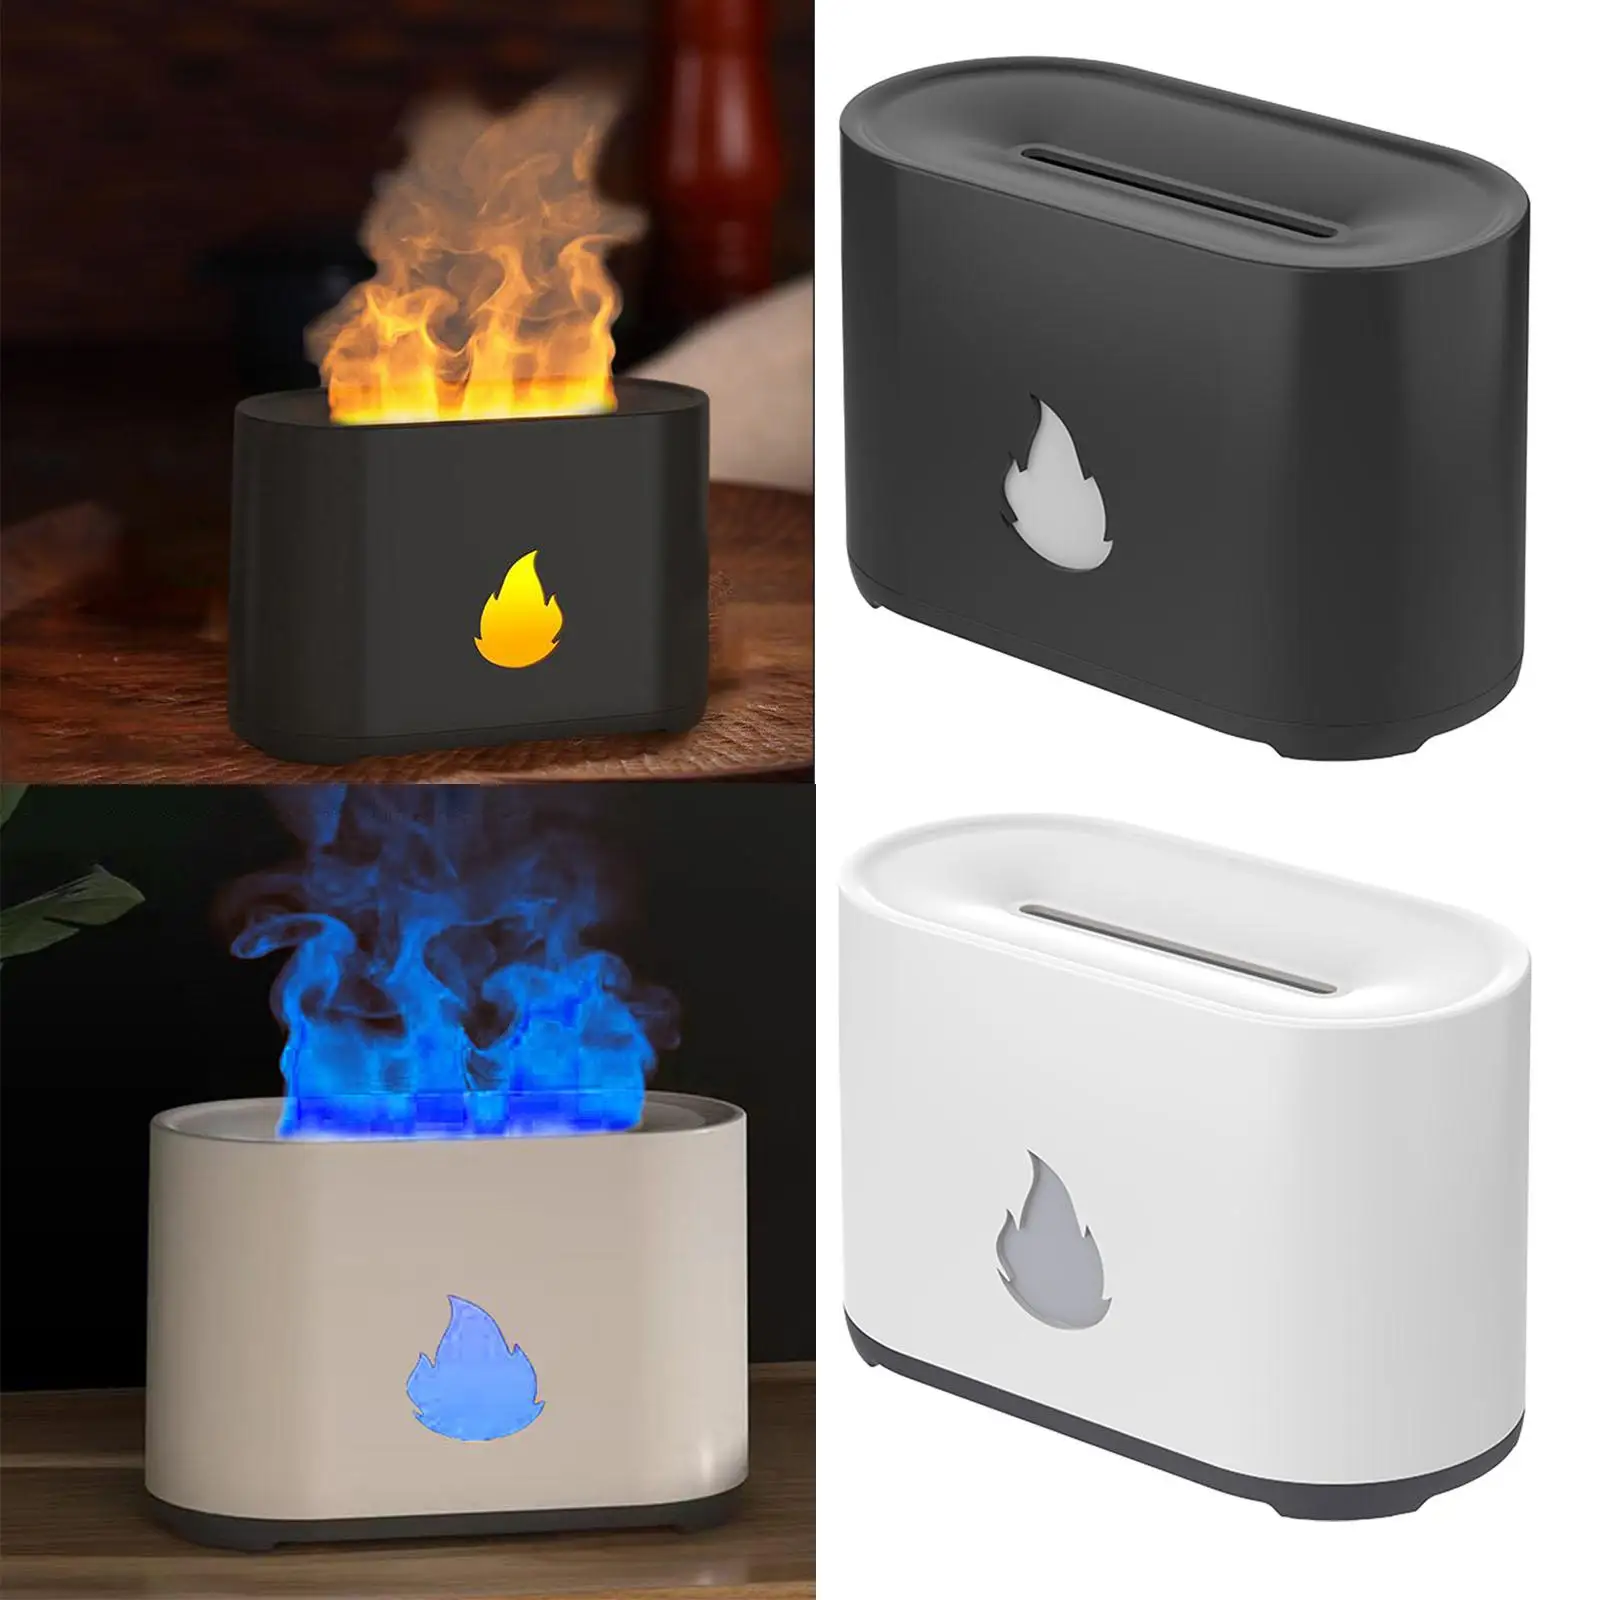 Flame Effect Humidifier Essential Oil Diffuser Noiseless with 7 Colors Light Personal Humidifier USB 200ml for Office Versatile